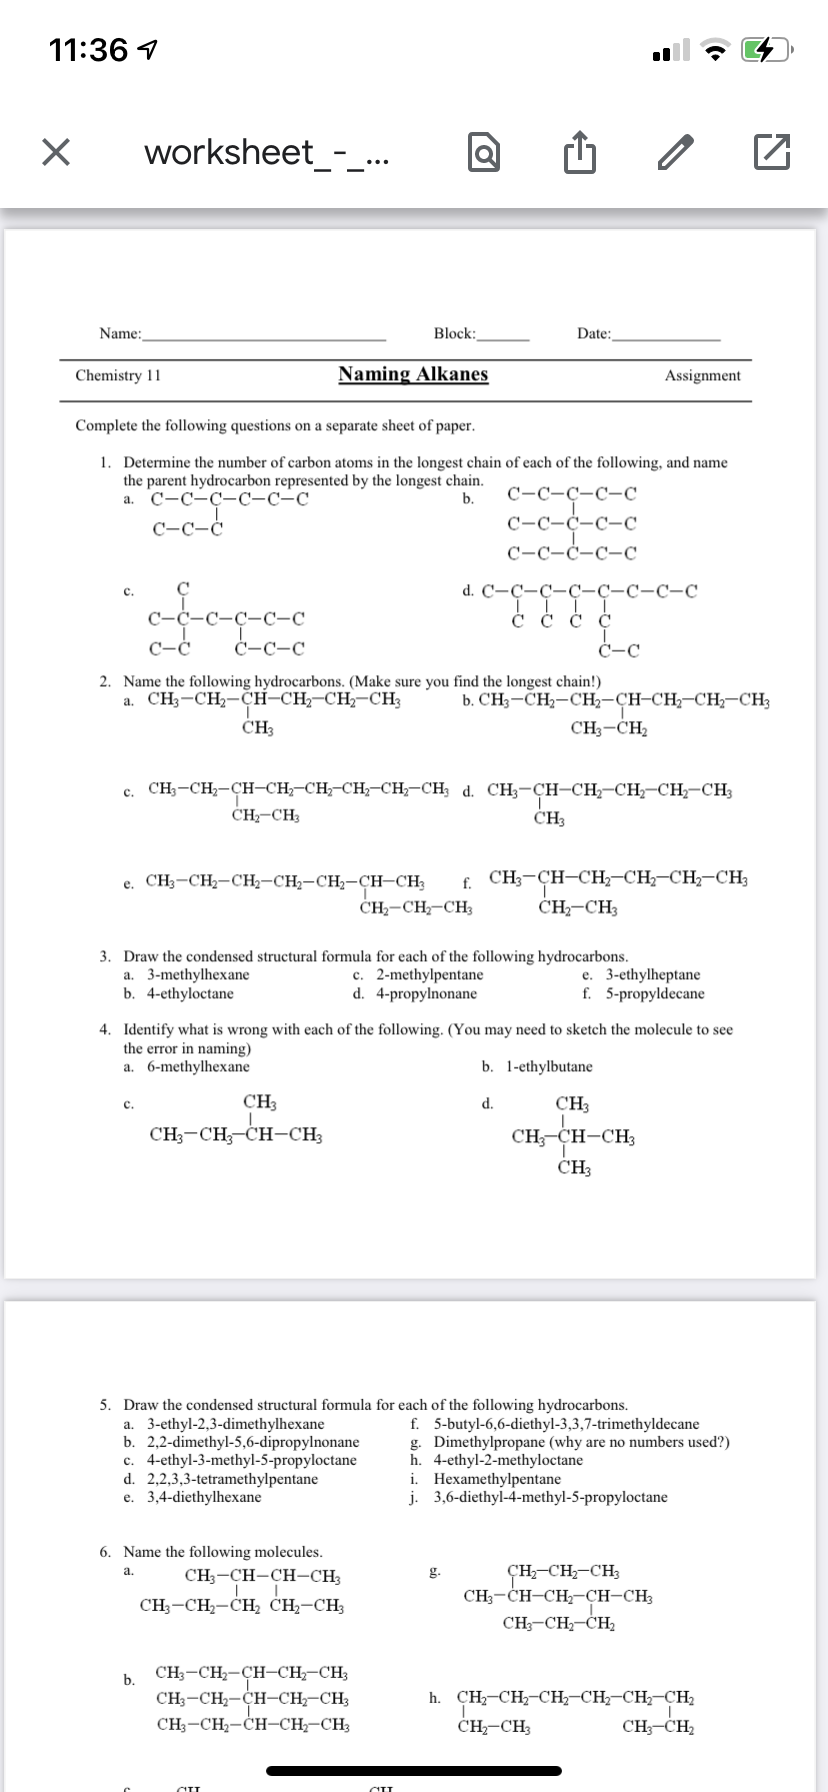 11:36 1
worksheet_-_..
Name:
Block:
Date:
Chemistry 11
Naming Alkanes
Assignment
Complete the following questions on a separate sheet of paper.
1.
Determine the number of carbon atoms
a the longest chain of each
the following, and name
the parent hydrocarbon represented by the longest chain.
а. С-С-С-С-С-С
С-С-ҫ-с-с
b.
C-C-Ċ
С-С-с-с-с
C-C-Ċ-C-C
d. C'-C-C-C-C-C-C-C
с.
C-Ċ-C-C
Č Č Č ¢
Ċ-C-C
Ċ-C
2. Name the following hydrocarbons. (Make sure you find the longest chain!)
a. CH3-CH2-CH-CH;-CH2-CH3
b. CH3-CH2-CH2-CH-CH;-CH;-CH3
CH3
CH3-CH2
c. CH;-CH,-CH-CH;-CH;-CH;-CH,-CH; d. CH;-CH-CH,-CH,-CH-CH3
CH-CH3
CH3
e. CH3-CH2-CH2-CH2-CH2-CH-CH;
CH-CH-CH3
f. CH3-CH-CH2-CH2-CH-CH3
ČH-CH3
3. Draw the condensed structural formula for each of the following hydrocarbons.
a. 3-methylhexane
b. 4-ethyloctane
c. 2-methylpentane
d. 4-propylnonane
e. 3-ethylheptane
f. 5-propyldecane
4. Identify what is wrong with each of the following. (You may need to sketch the molecule to see
the error in naming)
a. 6-methylhexane
b. 1-ethylbutane
CH3
d.
CH
с.
CH;-CH;-CH-CH3
CH, CH-CH3
ČH3
5. Draw the condensed structural formula for each of the following hydrocarbons.
a. 3-ethyl-2,3-dimethylhexane
b. 2,2-dimethyl-5,6-dipropylnonane
c. 4-ethyl-3-methyl-5-propyloctane
d. 2,2,3,3-tetramethylpentane
e. 3,4-diethylhexane
f. 5-butyl-6,6-diethyl-3,3,7-trimethyldecane
g. Dimethylpropane (why are no numbers used?)
h. 4-ethyl-2-methyloctane
i. Hexamethylpentane
j. 3,6-diethyl-4-methyl-5-propyloctane
6. Name the following molecules.
ÇH,-CH-CH;
CH;-CH-CH-CH-CH3
CH;-CH-CH2
a.
CH;-CH-CH-CH;
g.
CH;-CH,-CH, CH,-CH;
CH;-CH,-CH-CH;-CH3
CH;-CH2-CH-CH-CH3
CH;-CH2-CH-CH-CH3
b.
h. CH-CH,-CH;-CH-CH-CH2
ČH-CH3
CH;-CH2
